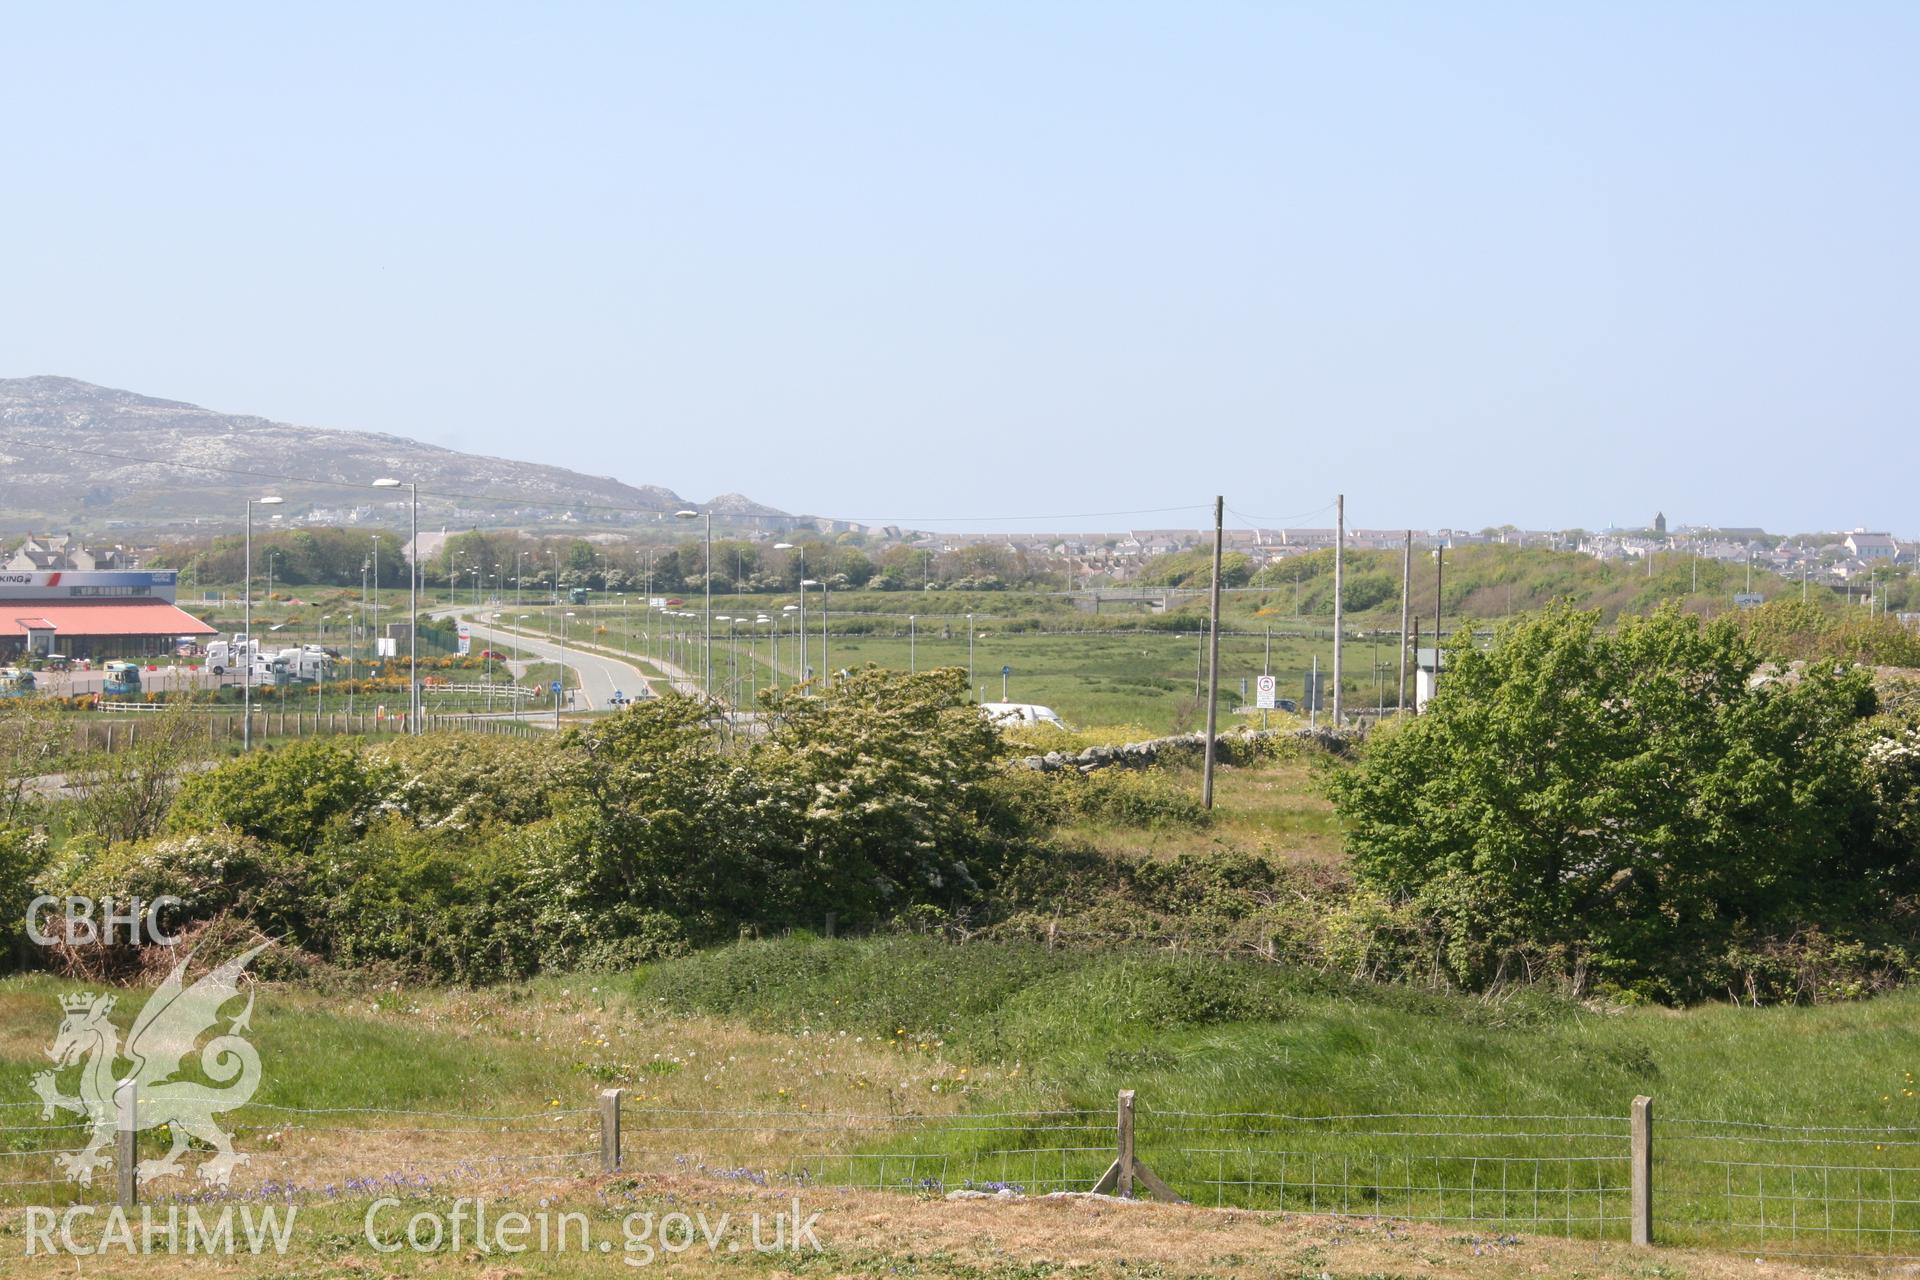 Shot, using slight camera zoom, towards Ty-Mawr Standing Stone and the development site. Looking northwest. Digital photograph taken for archaeological work at Parc Cybi Enterprise Zone, Holyhead, carried out by Archaeology Wales, 2017. Project no: P2522.